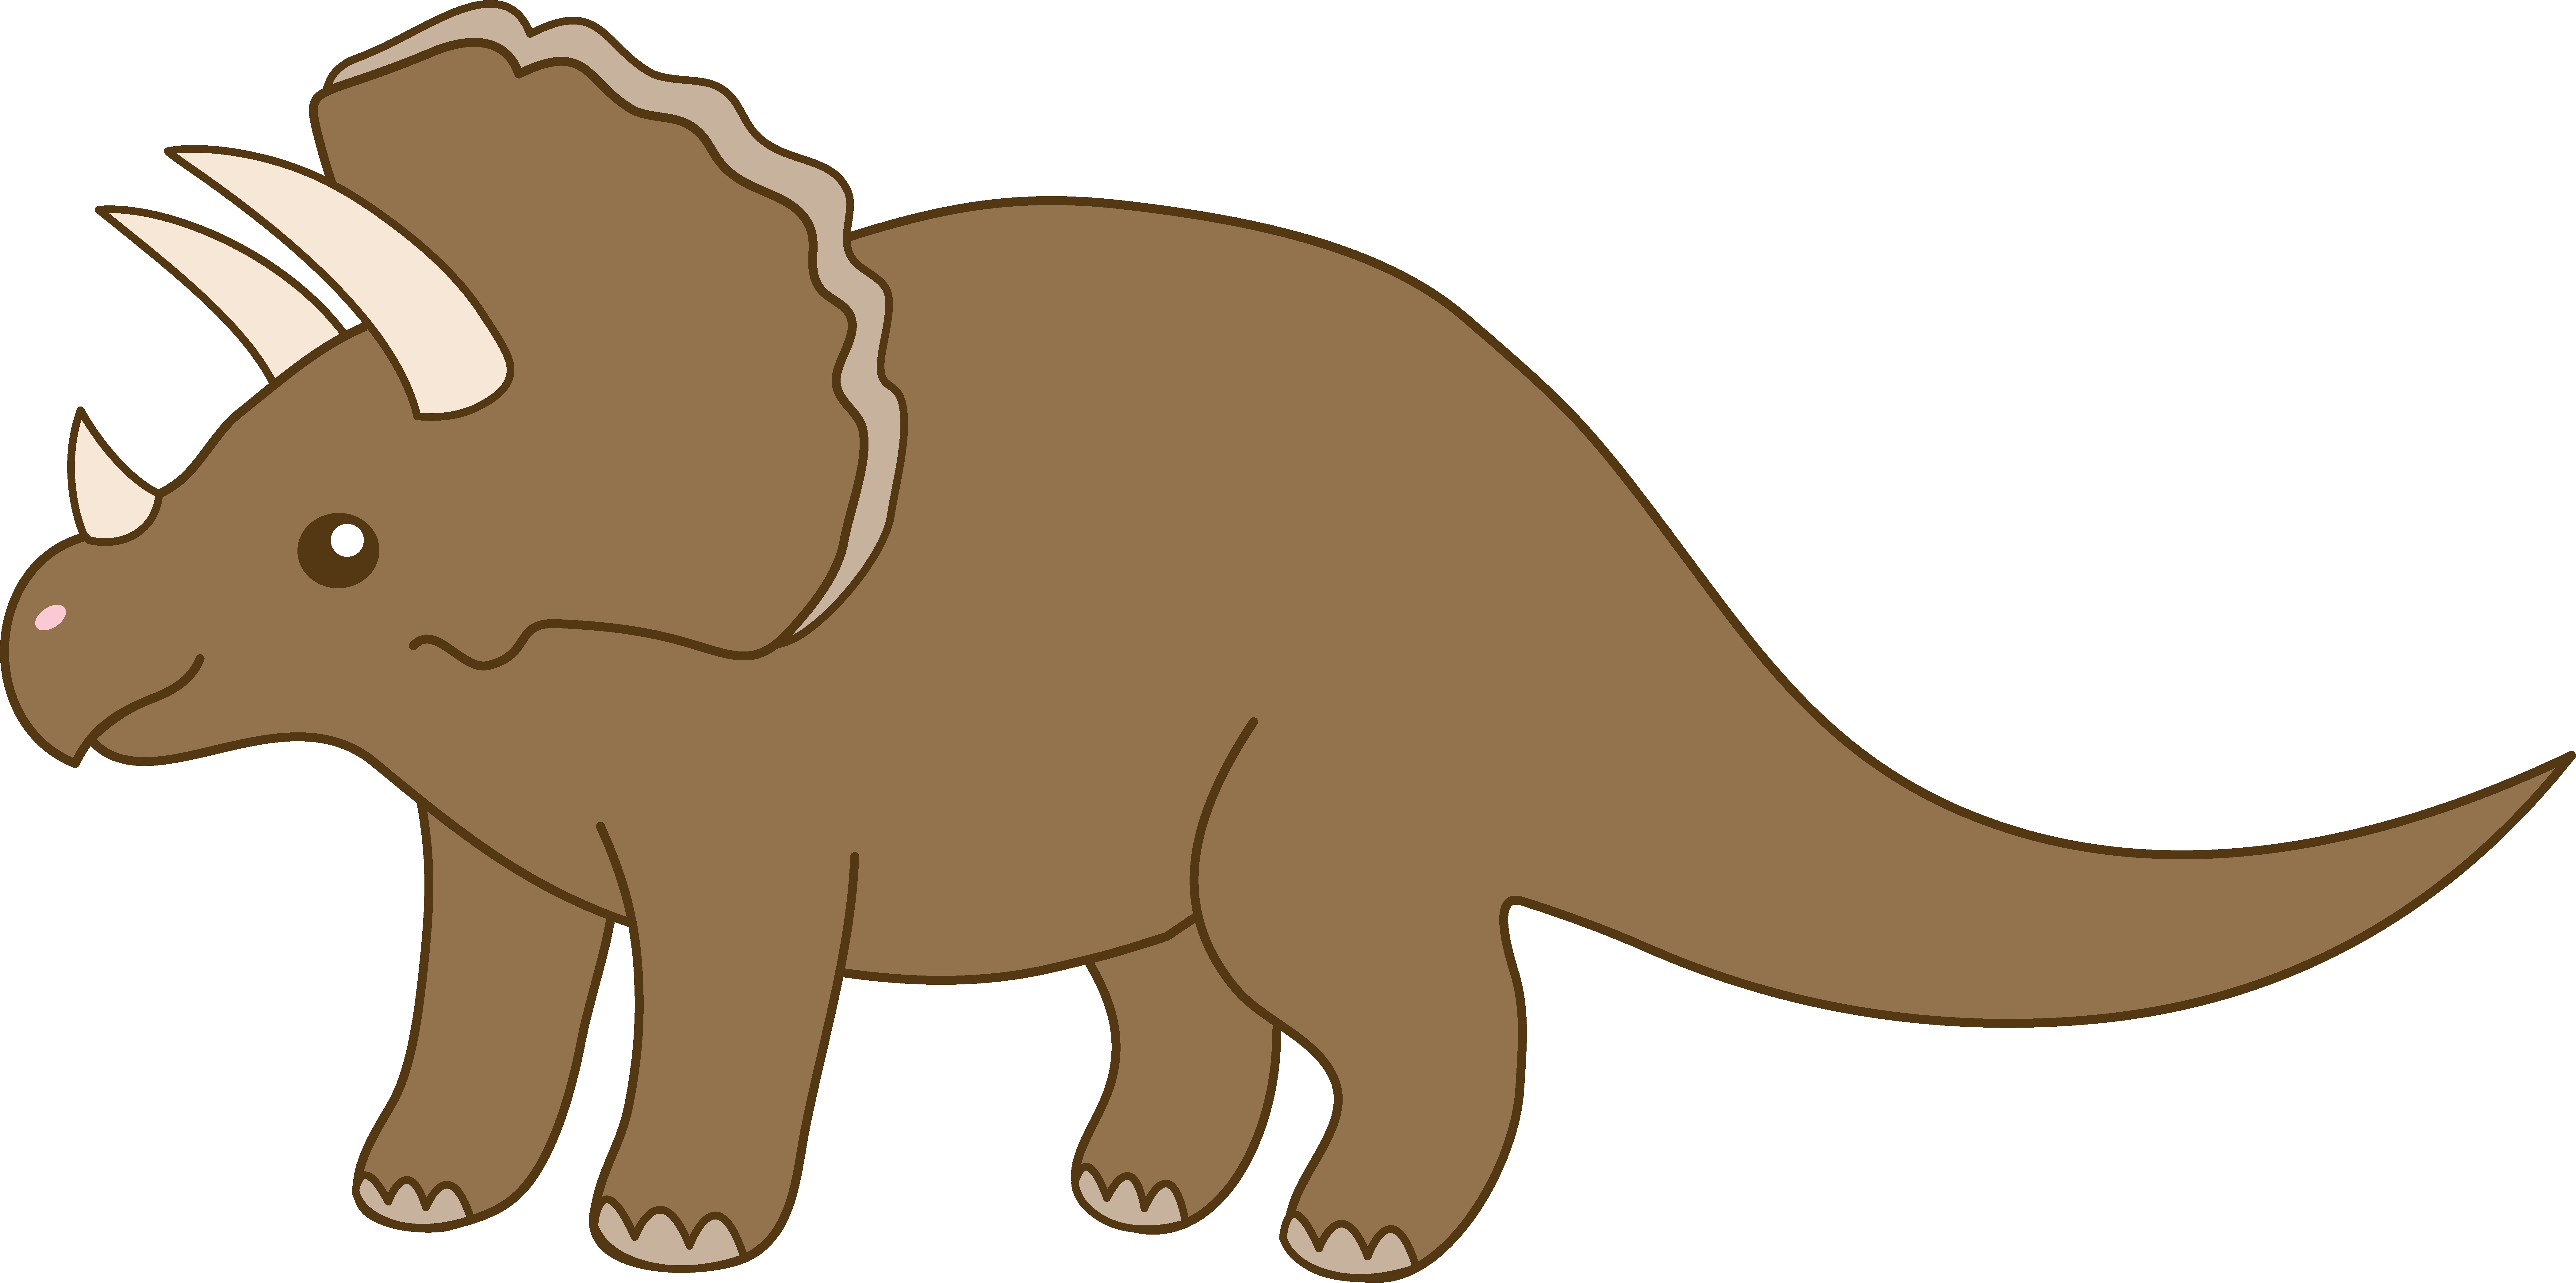 Dinosaur clip art free for kids free clipart images